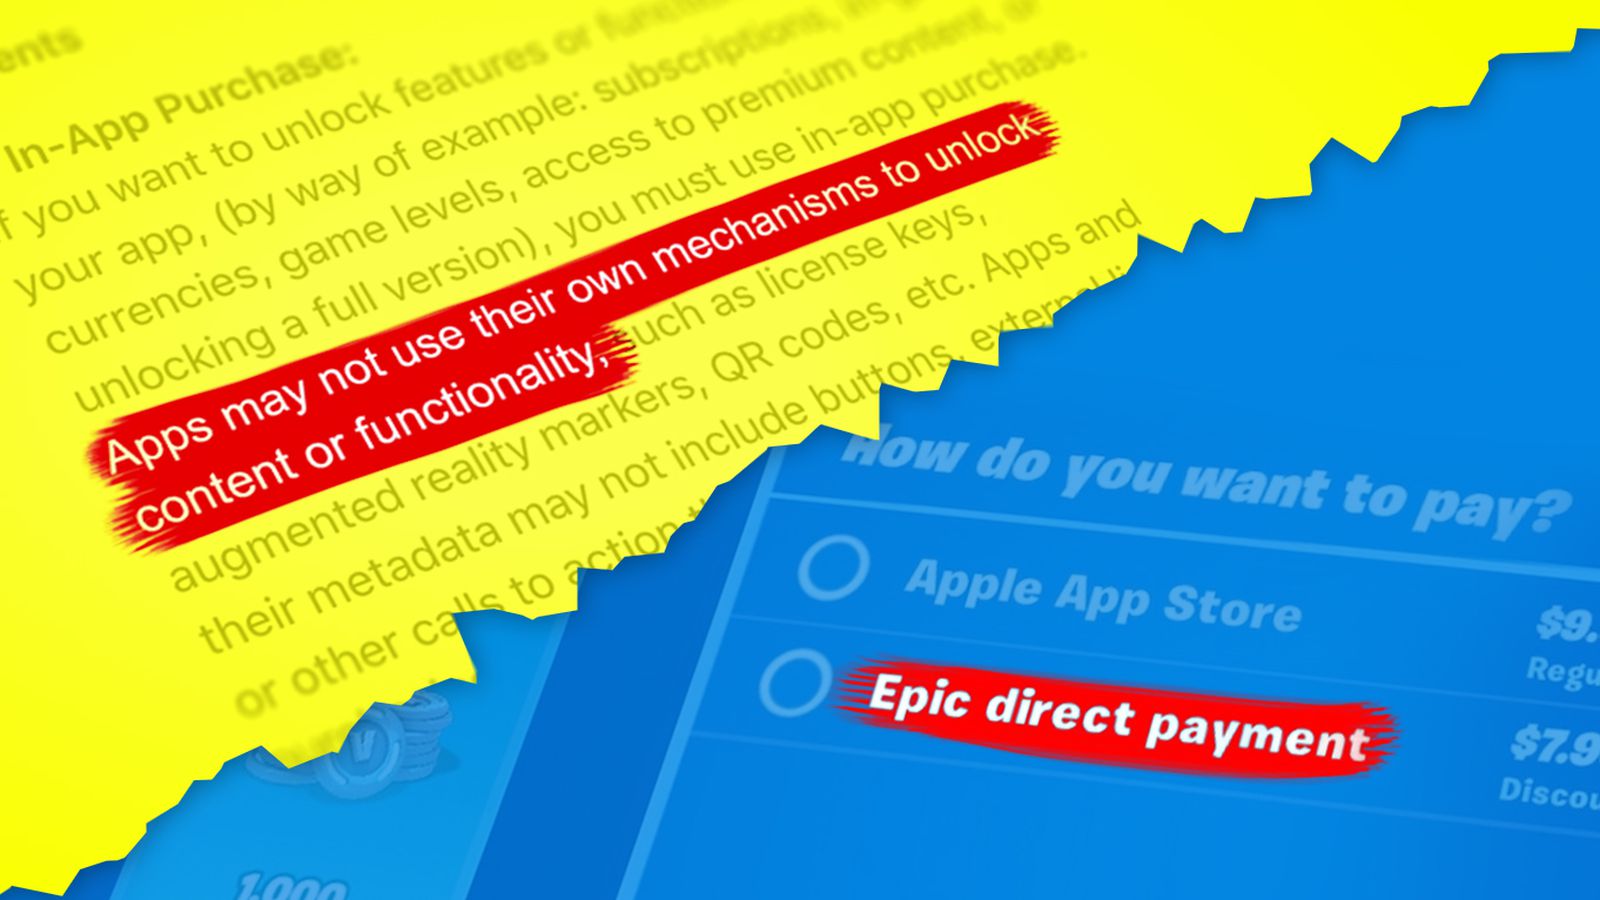 Fortnite Introduces Direct Payment Option on iOS Despite Apple's App Store Review Guidelines [Updated] - MacRumors